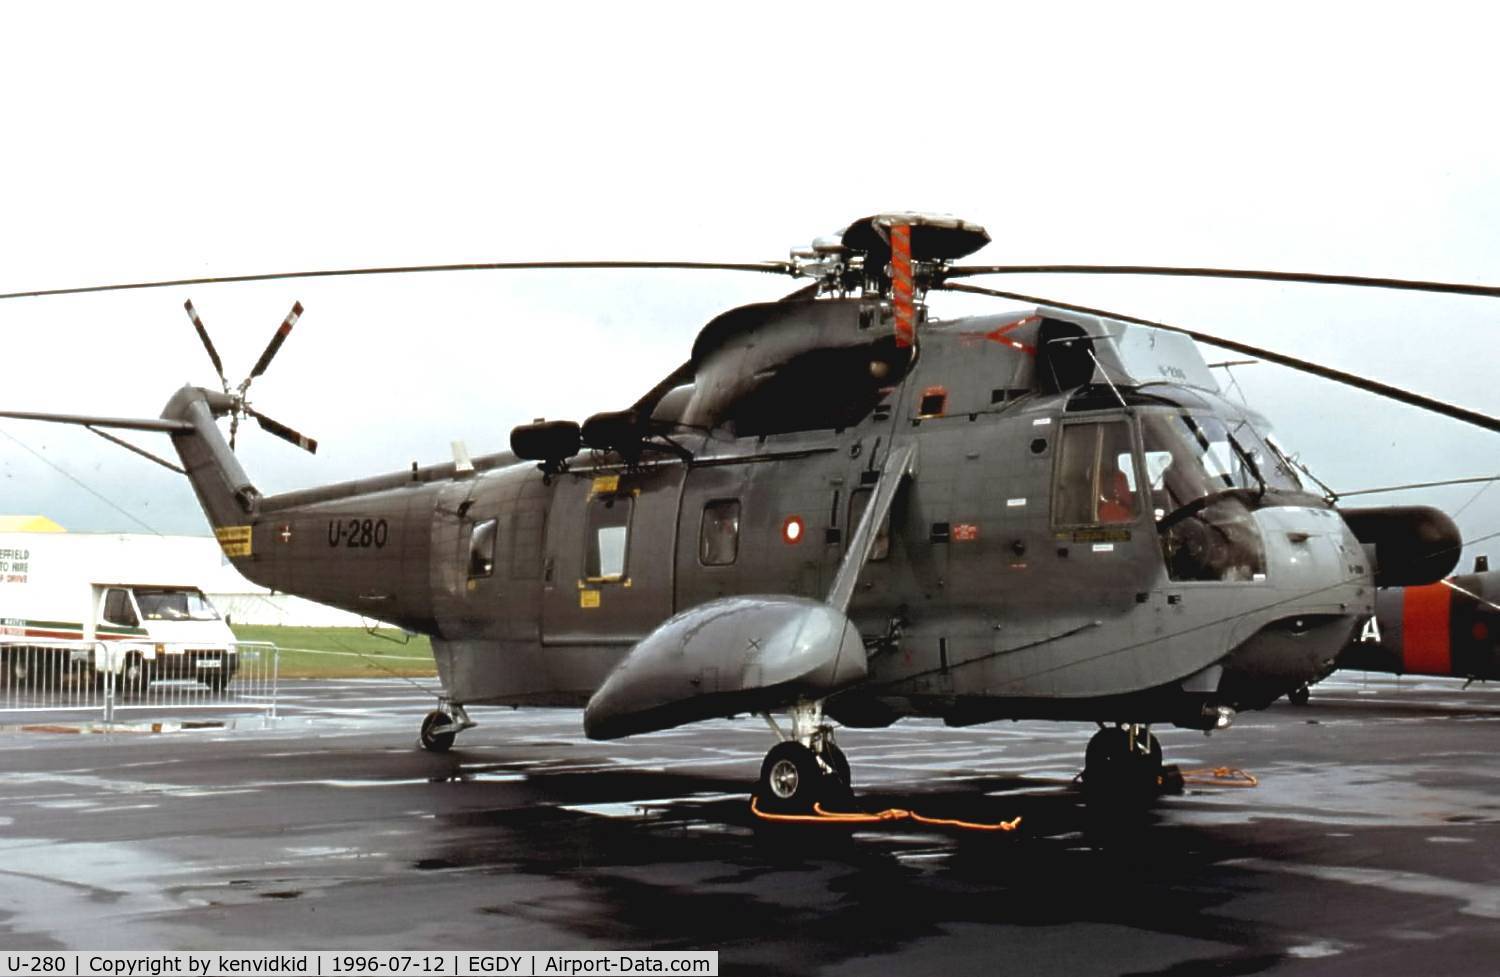 U-280, Sikorsky S-61A C/N 61280, At the 1996 photocall prior to the Yeovilton Air Show.